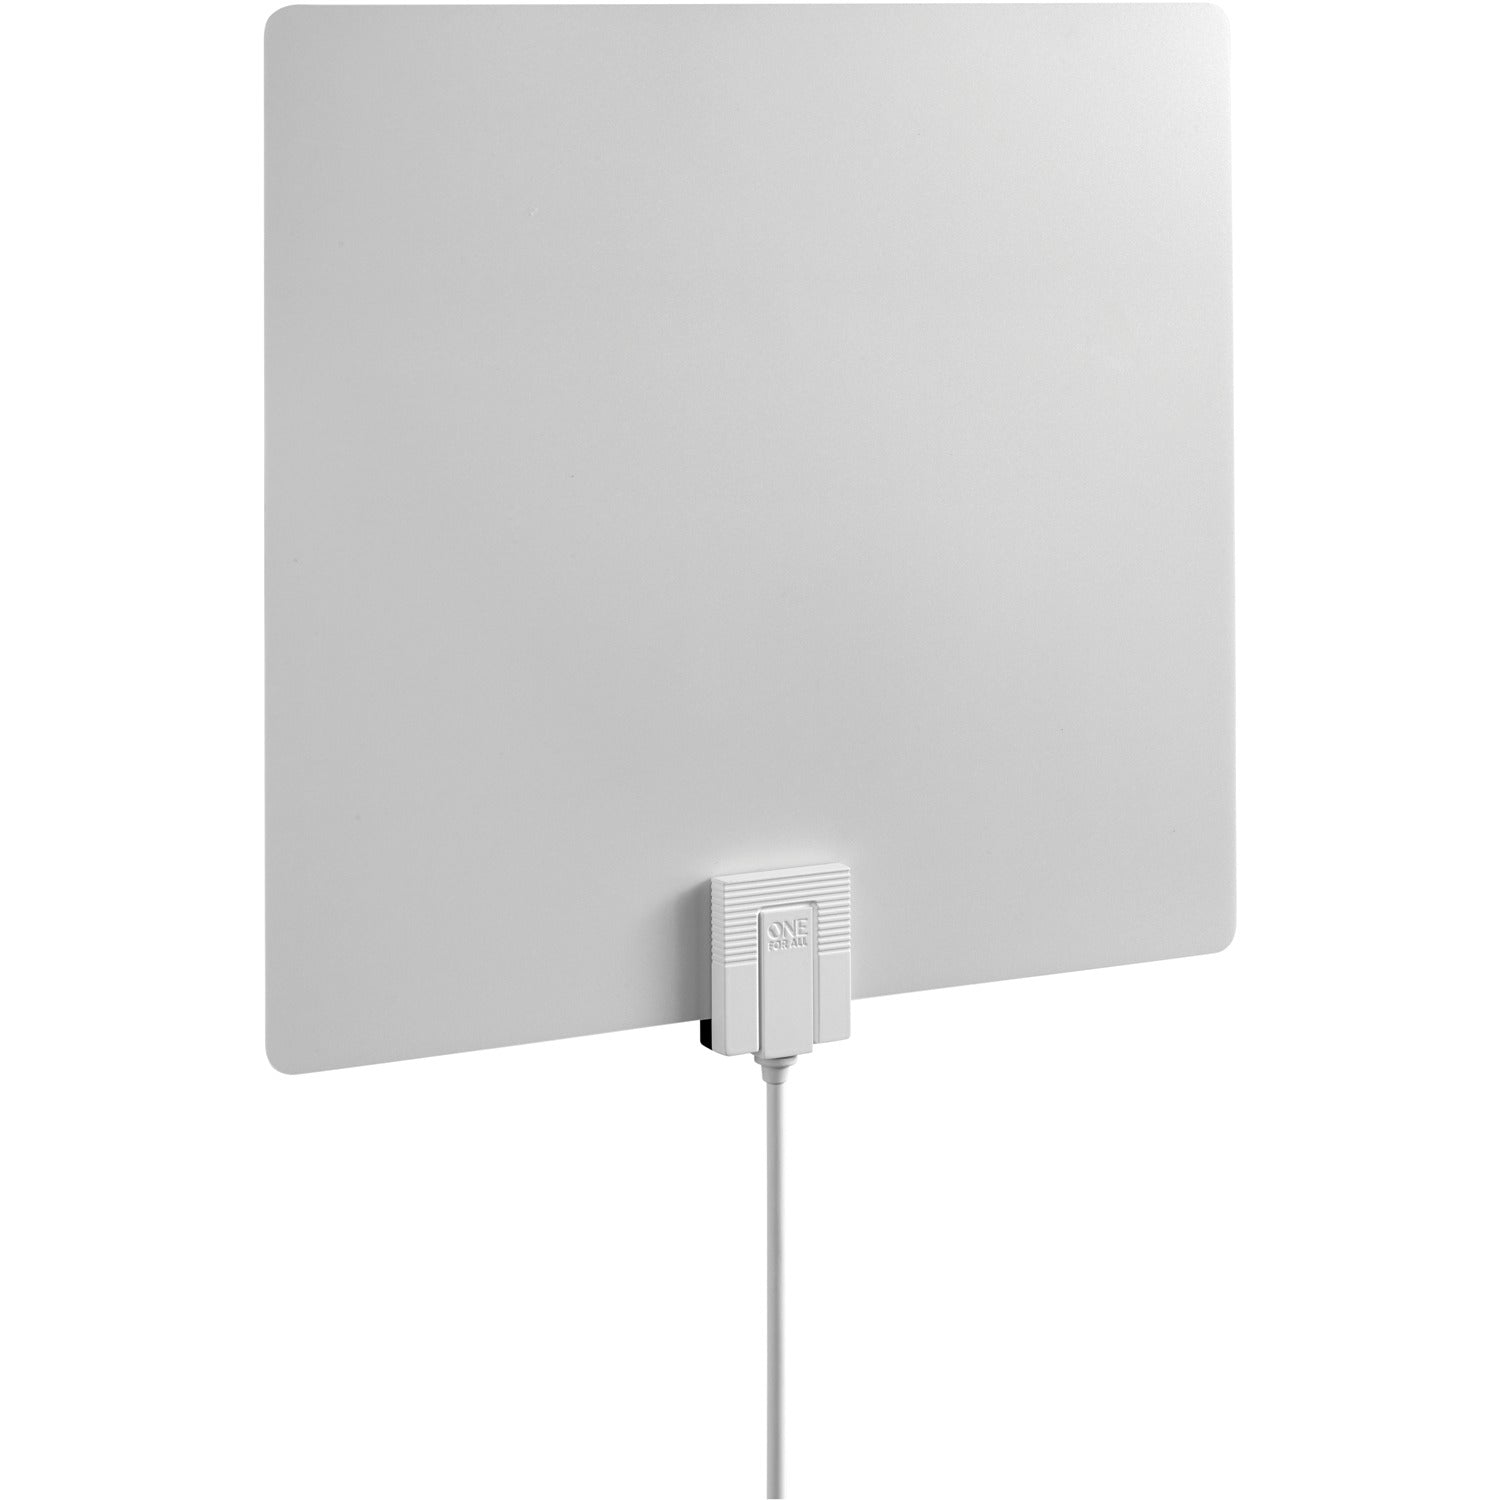 One For All 14551 Amplified Indoor HDTV Antenna